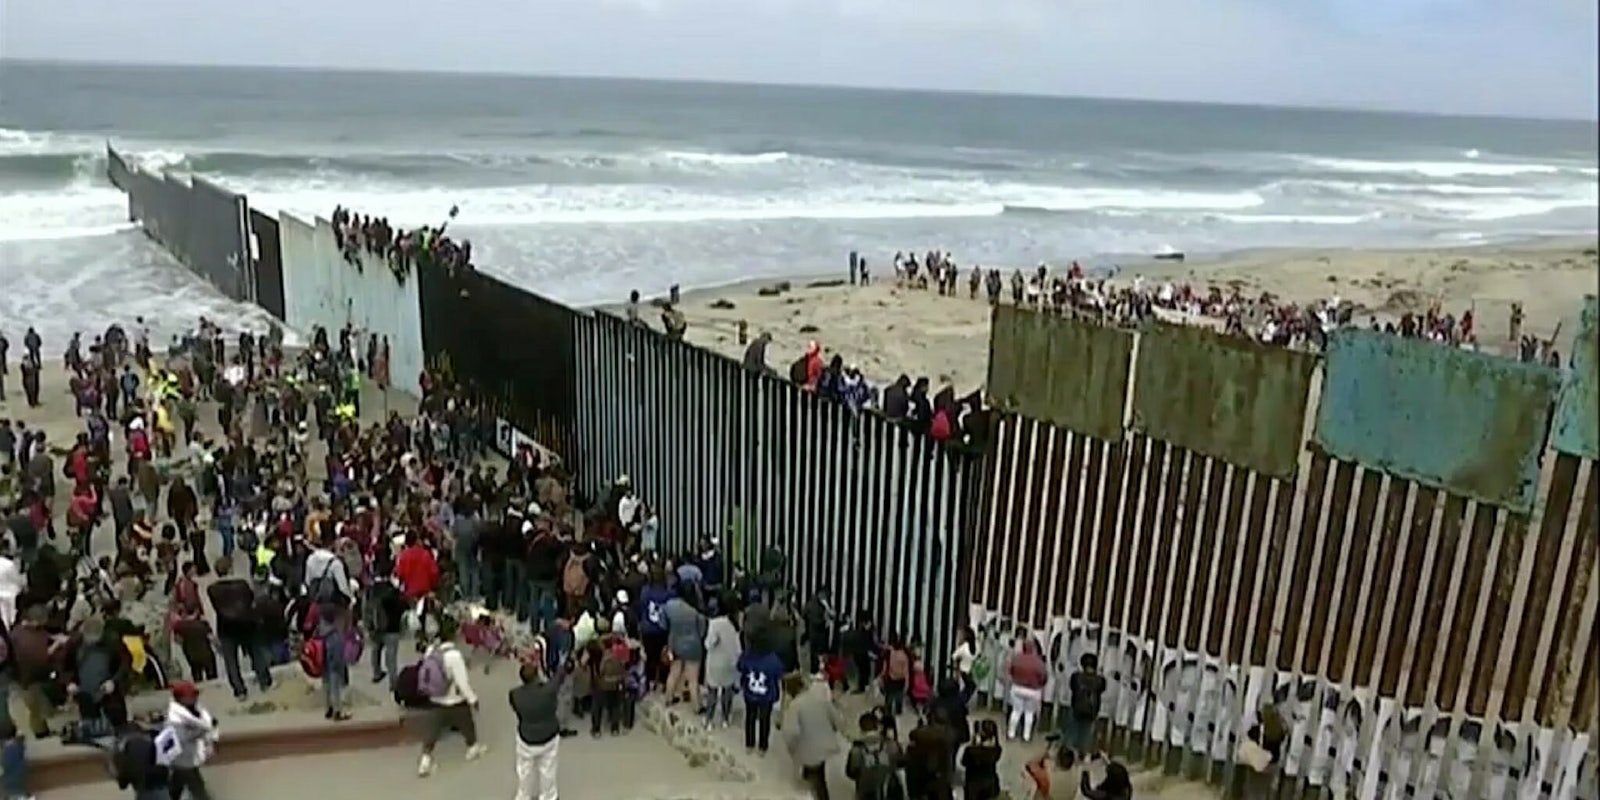 A caravan of Central American migrants standing along and sitting on the U.S.-Mexico border wall in San Diego.